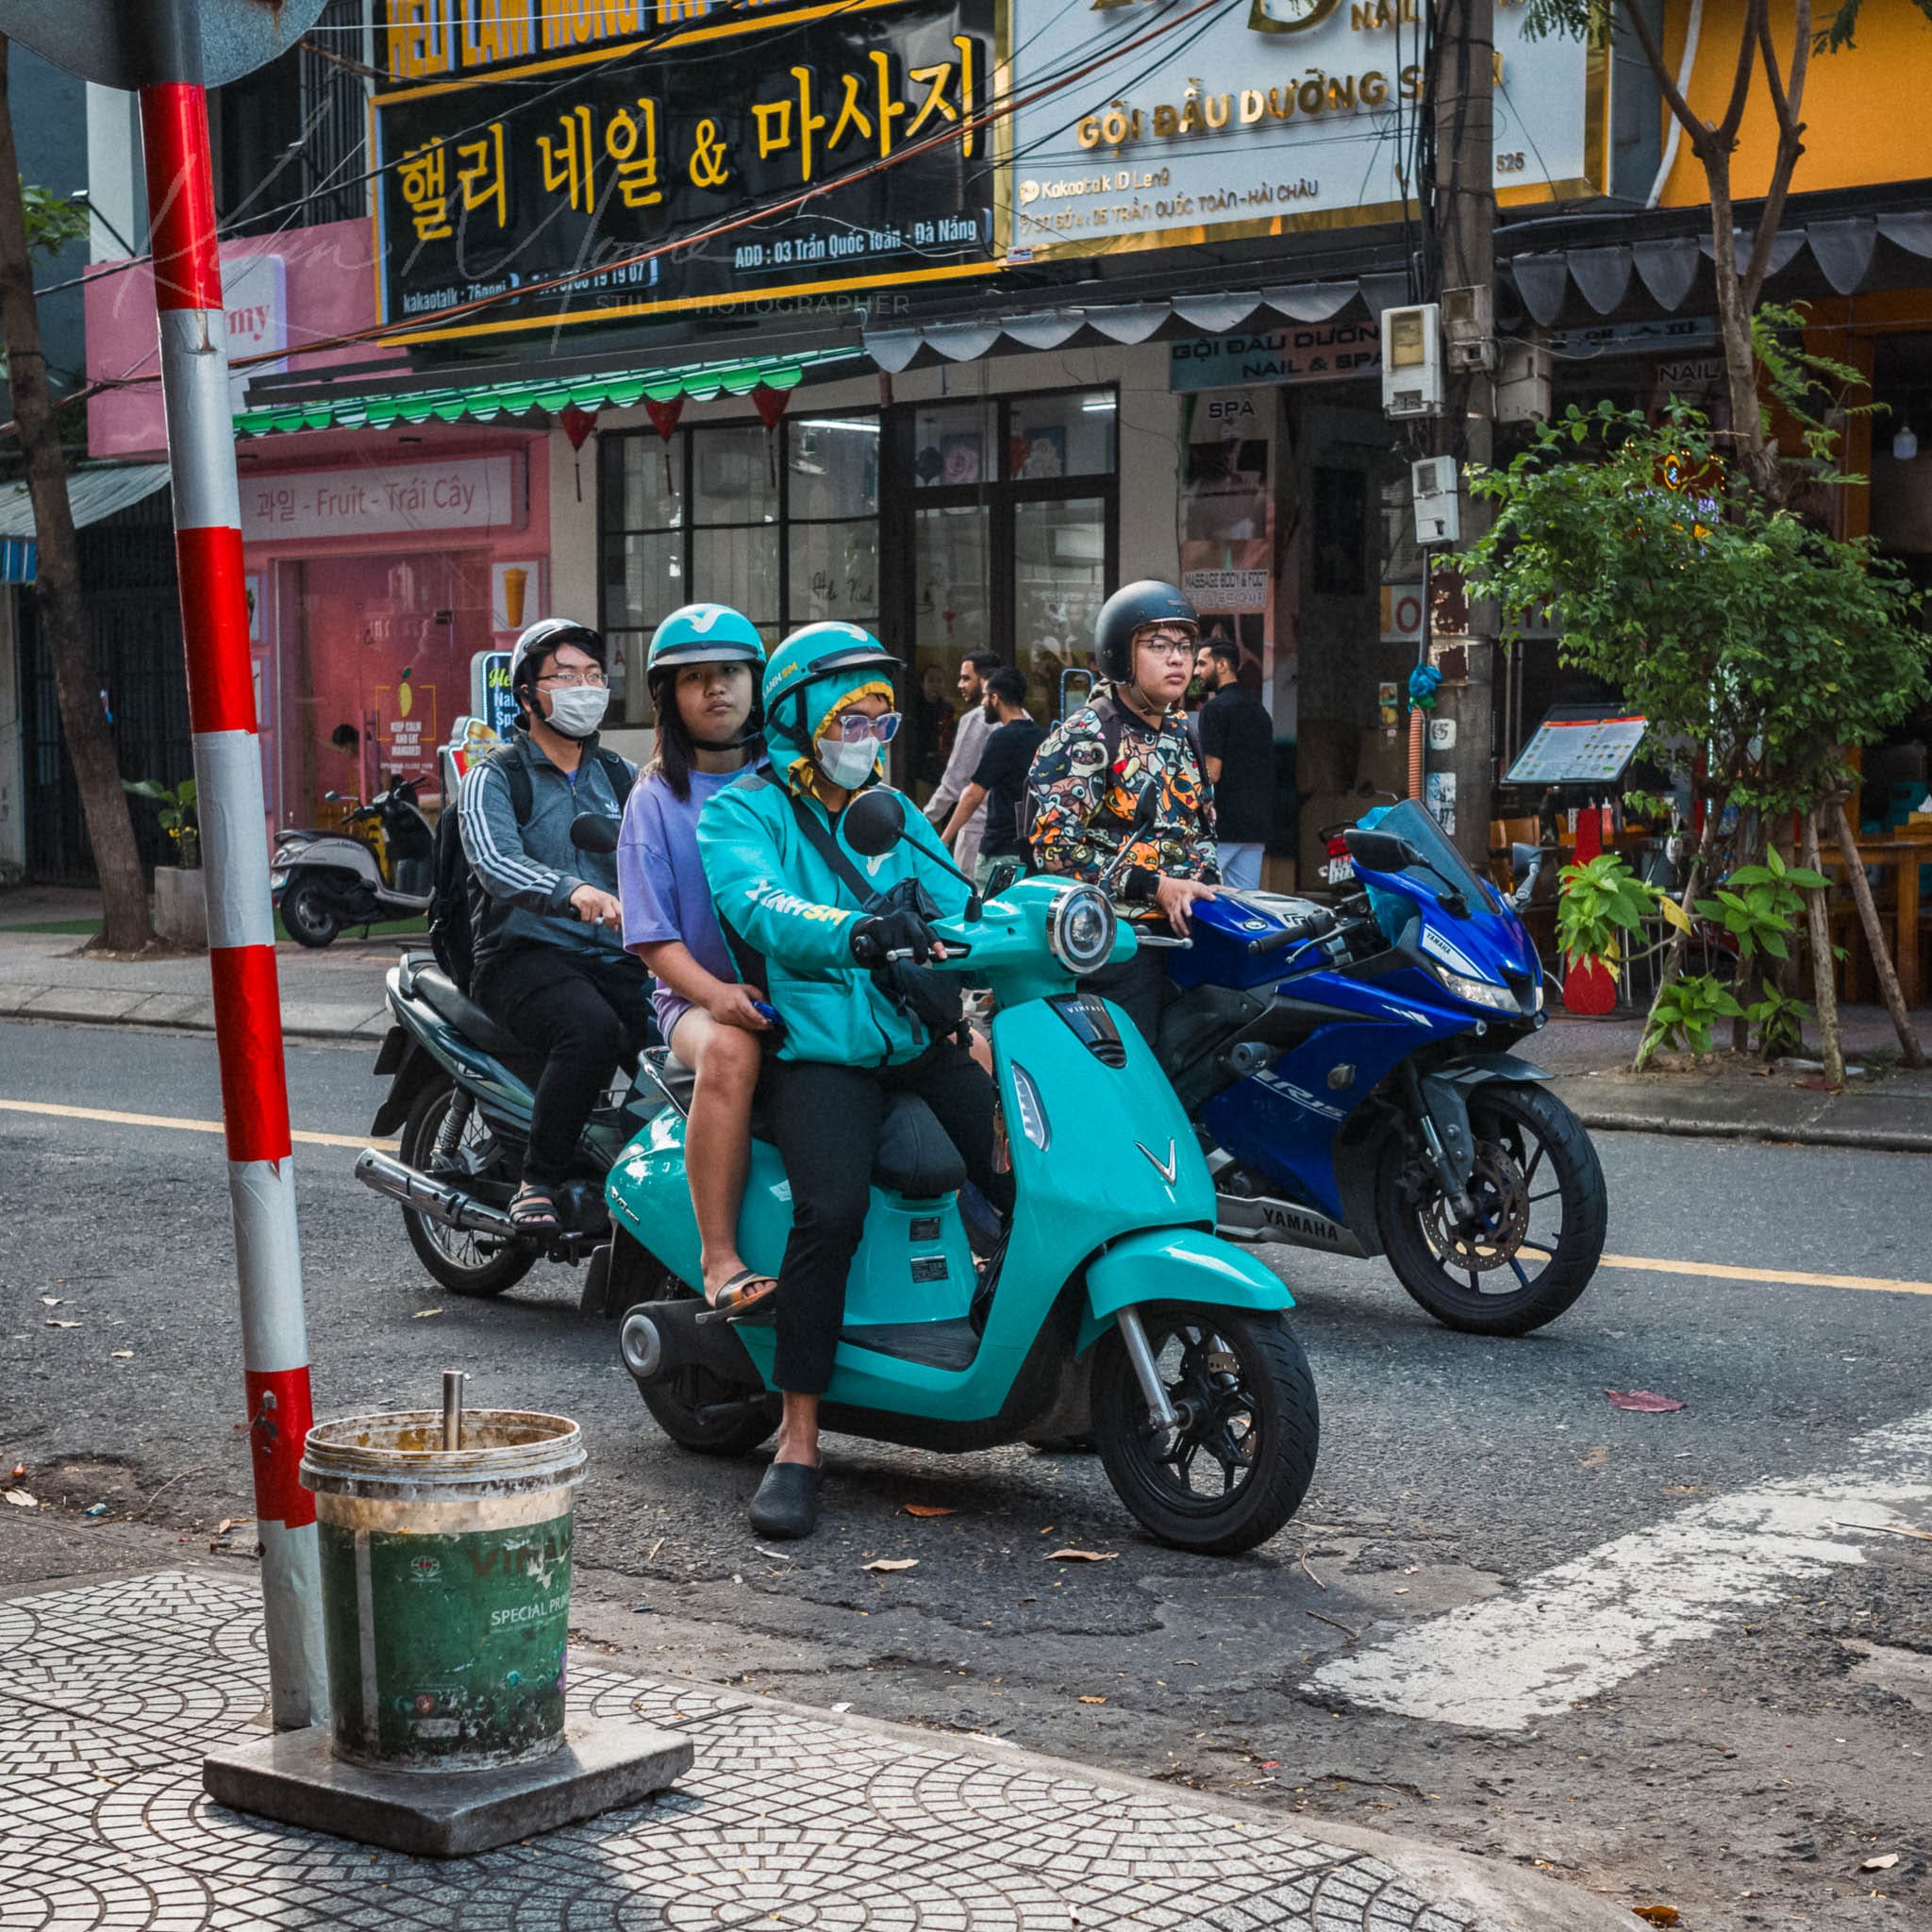 Four individuals waiting at a Da Nang city intersection on brightly colored scooters and motorcycles.